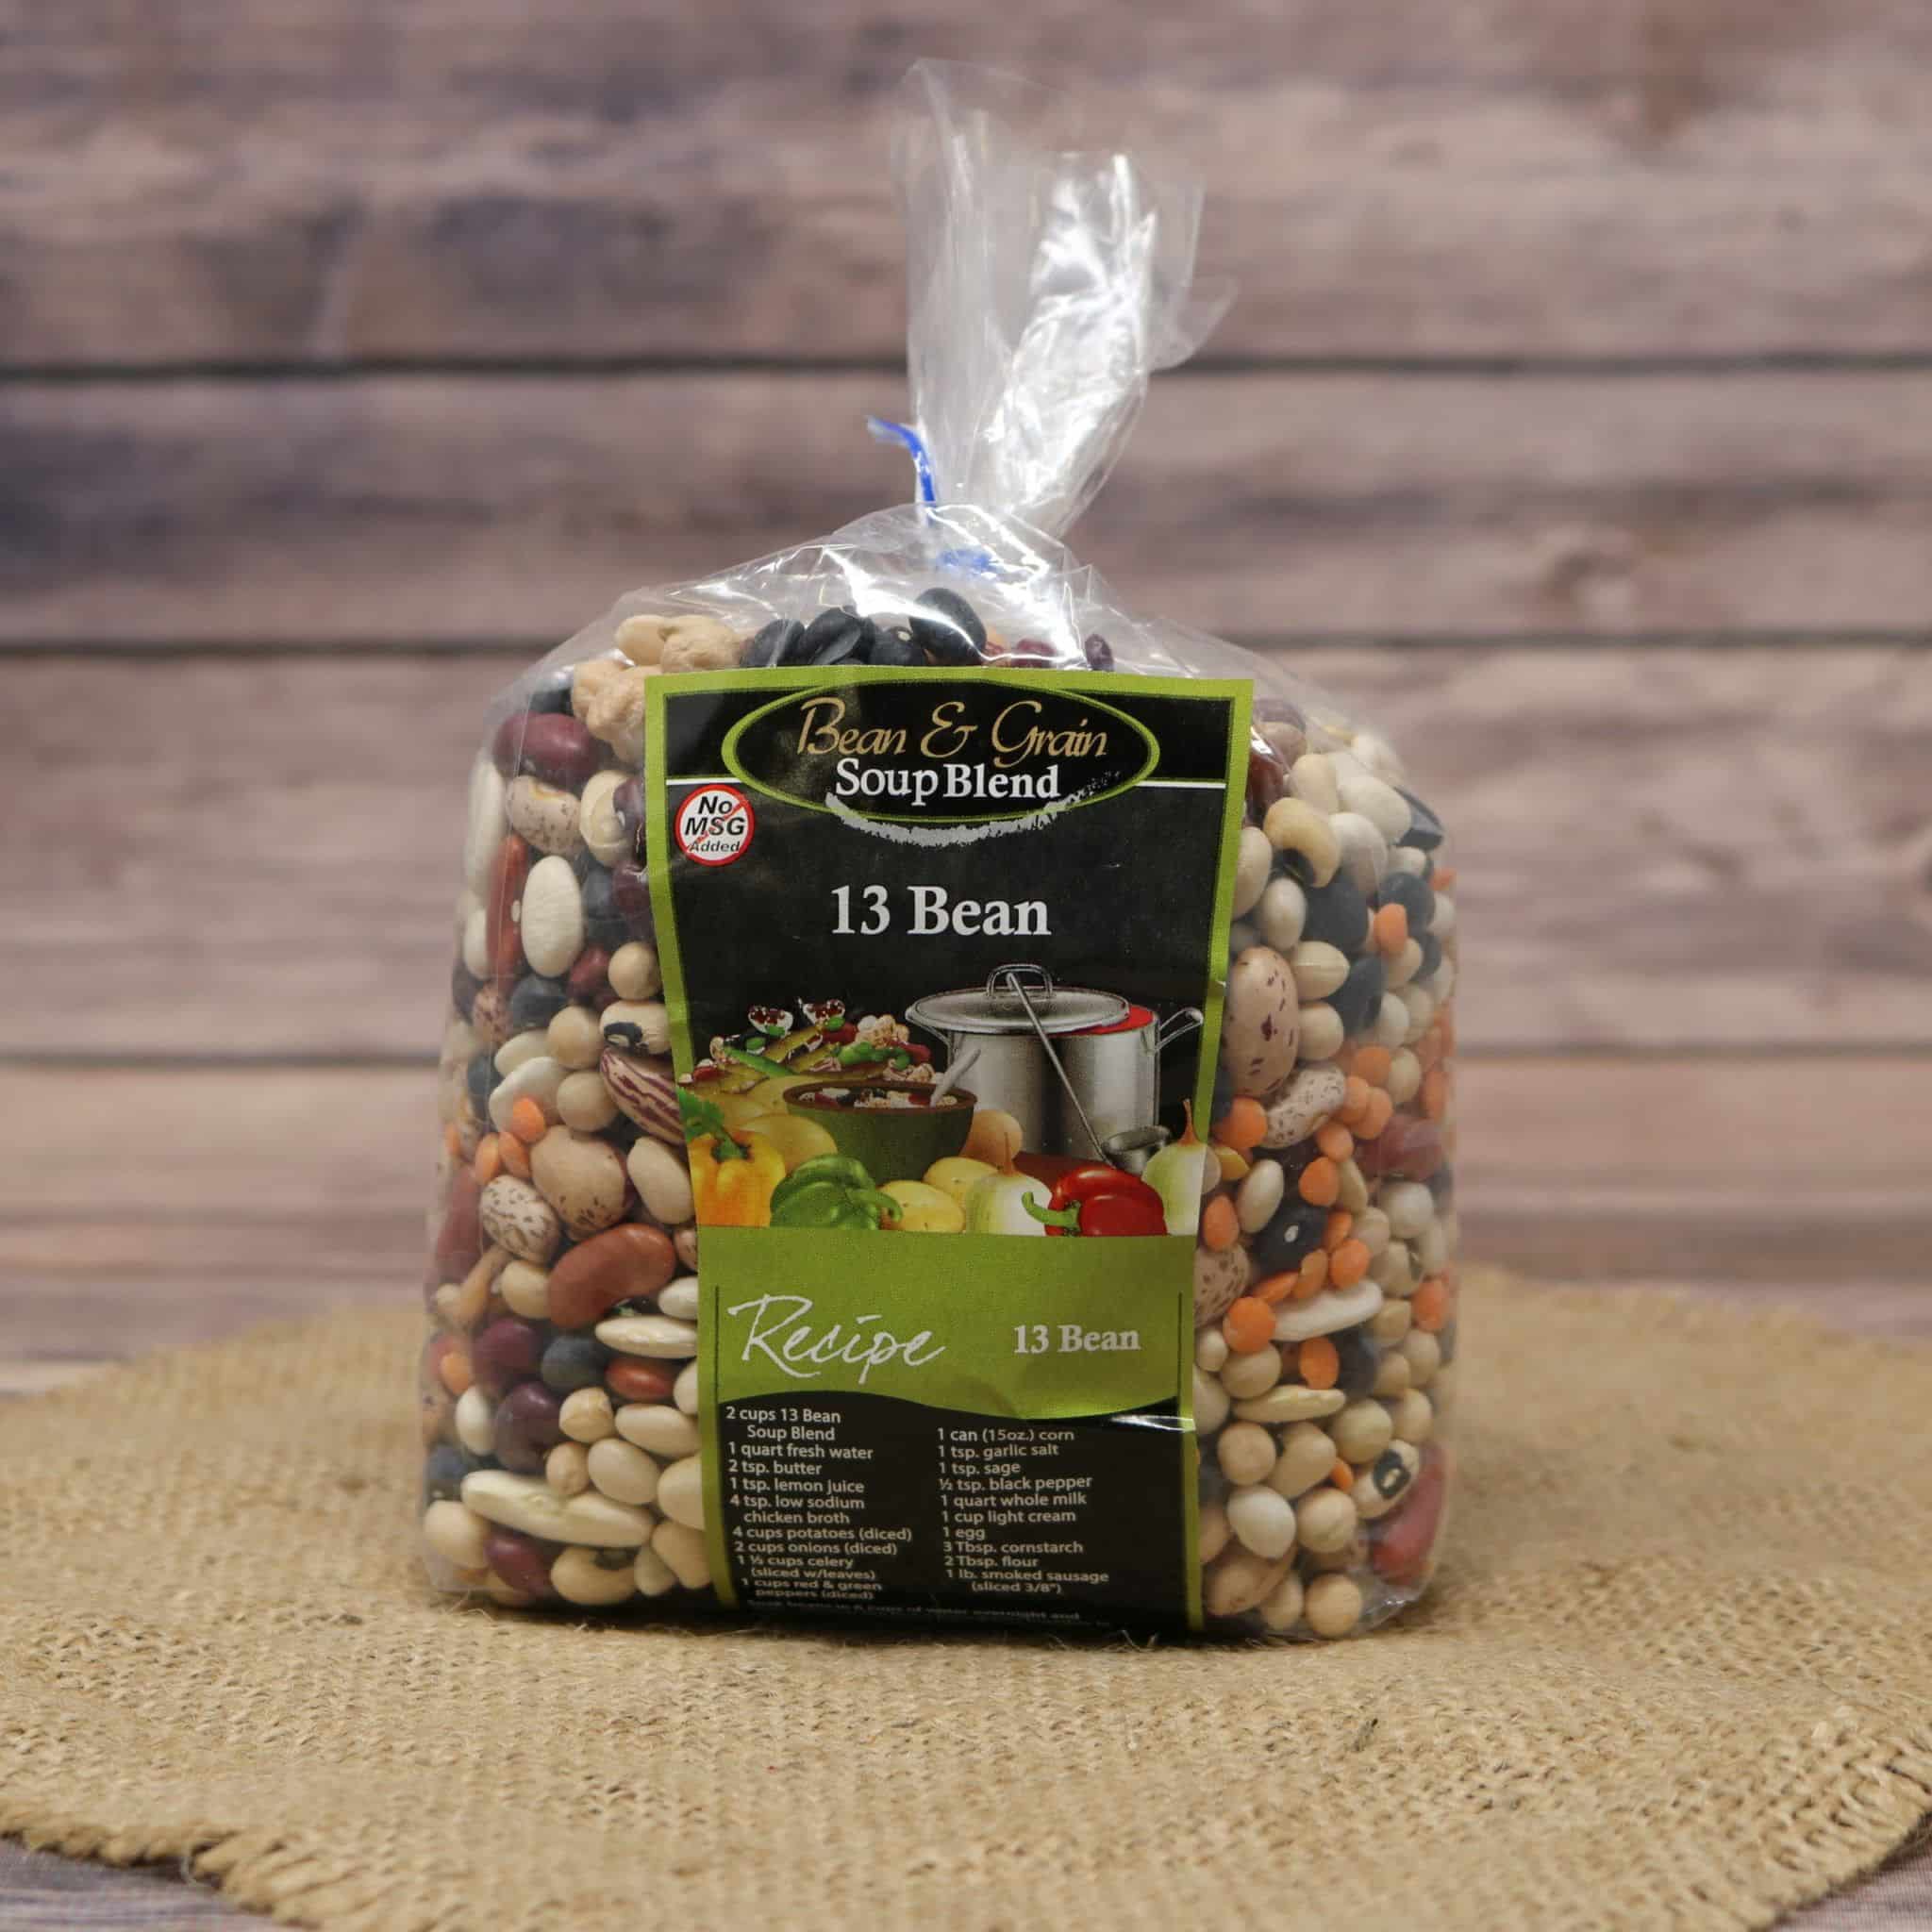 https://www.asherycountrystore.com/wp-content/uploads/2020/04/13Bean-scaled.jpg